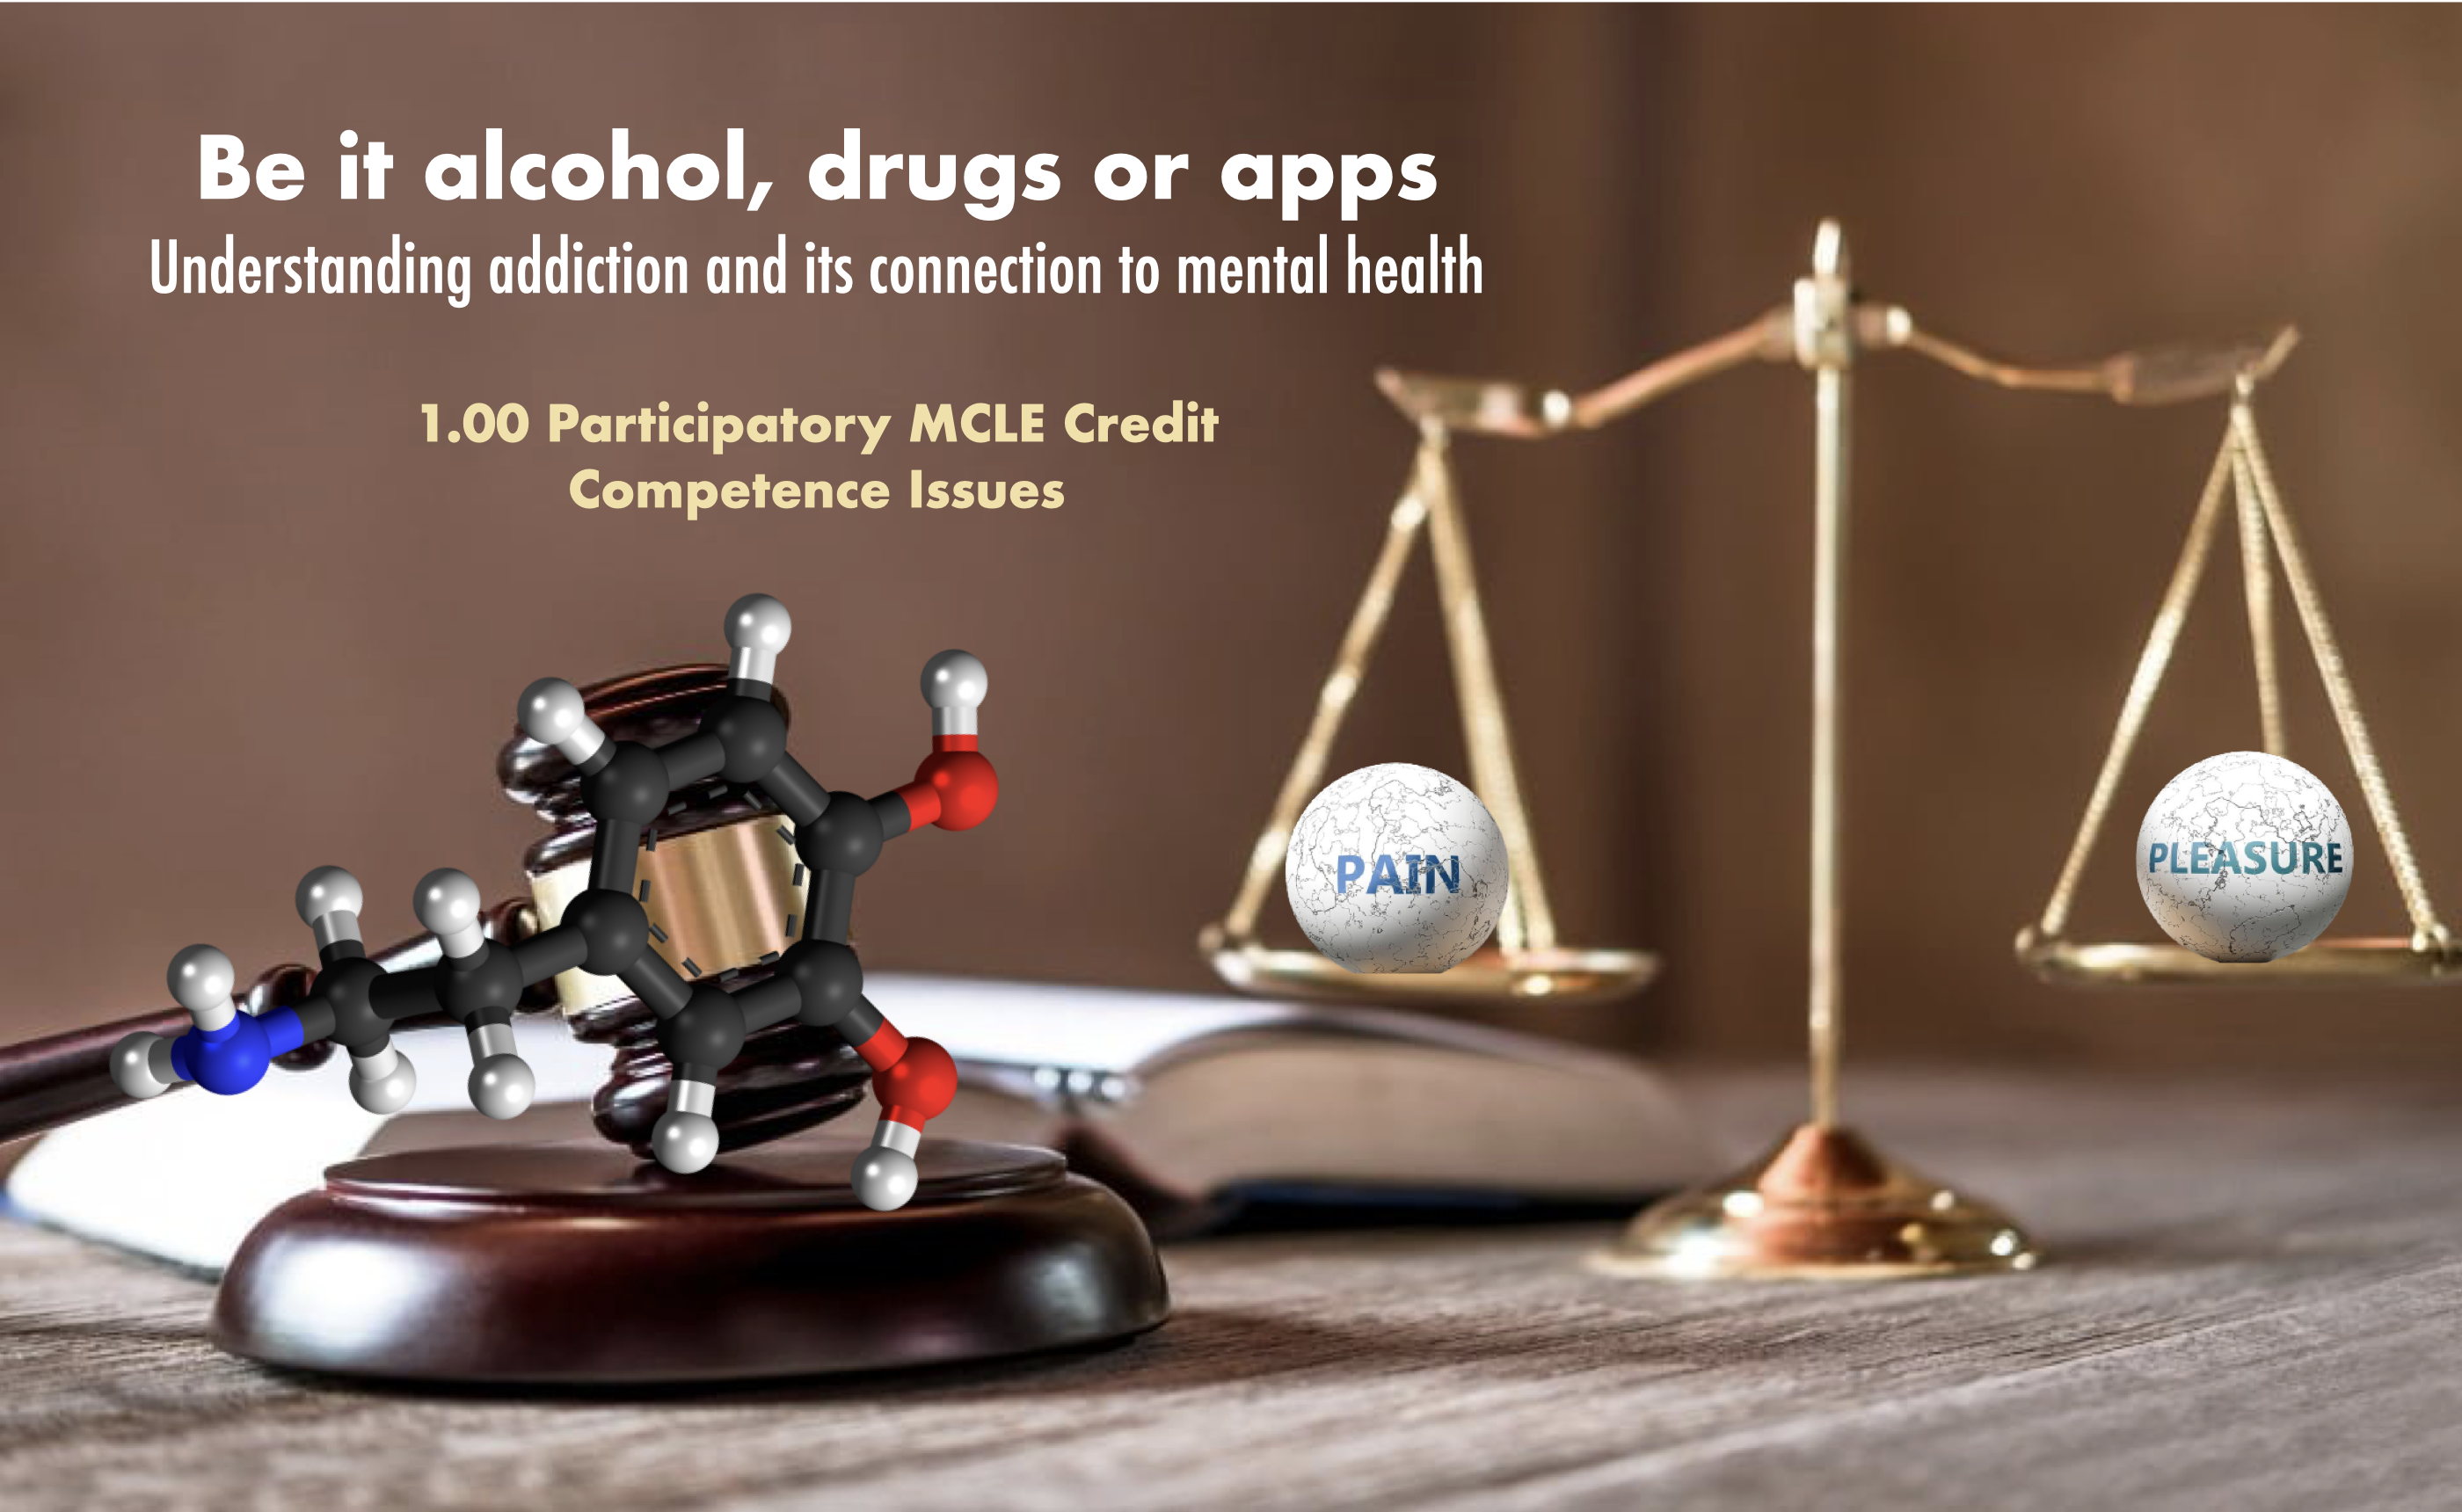 Be It Alcohol, Drugs or Apps: Understanding Addiction and Its Connection to Mental Health